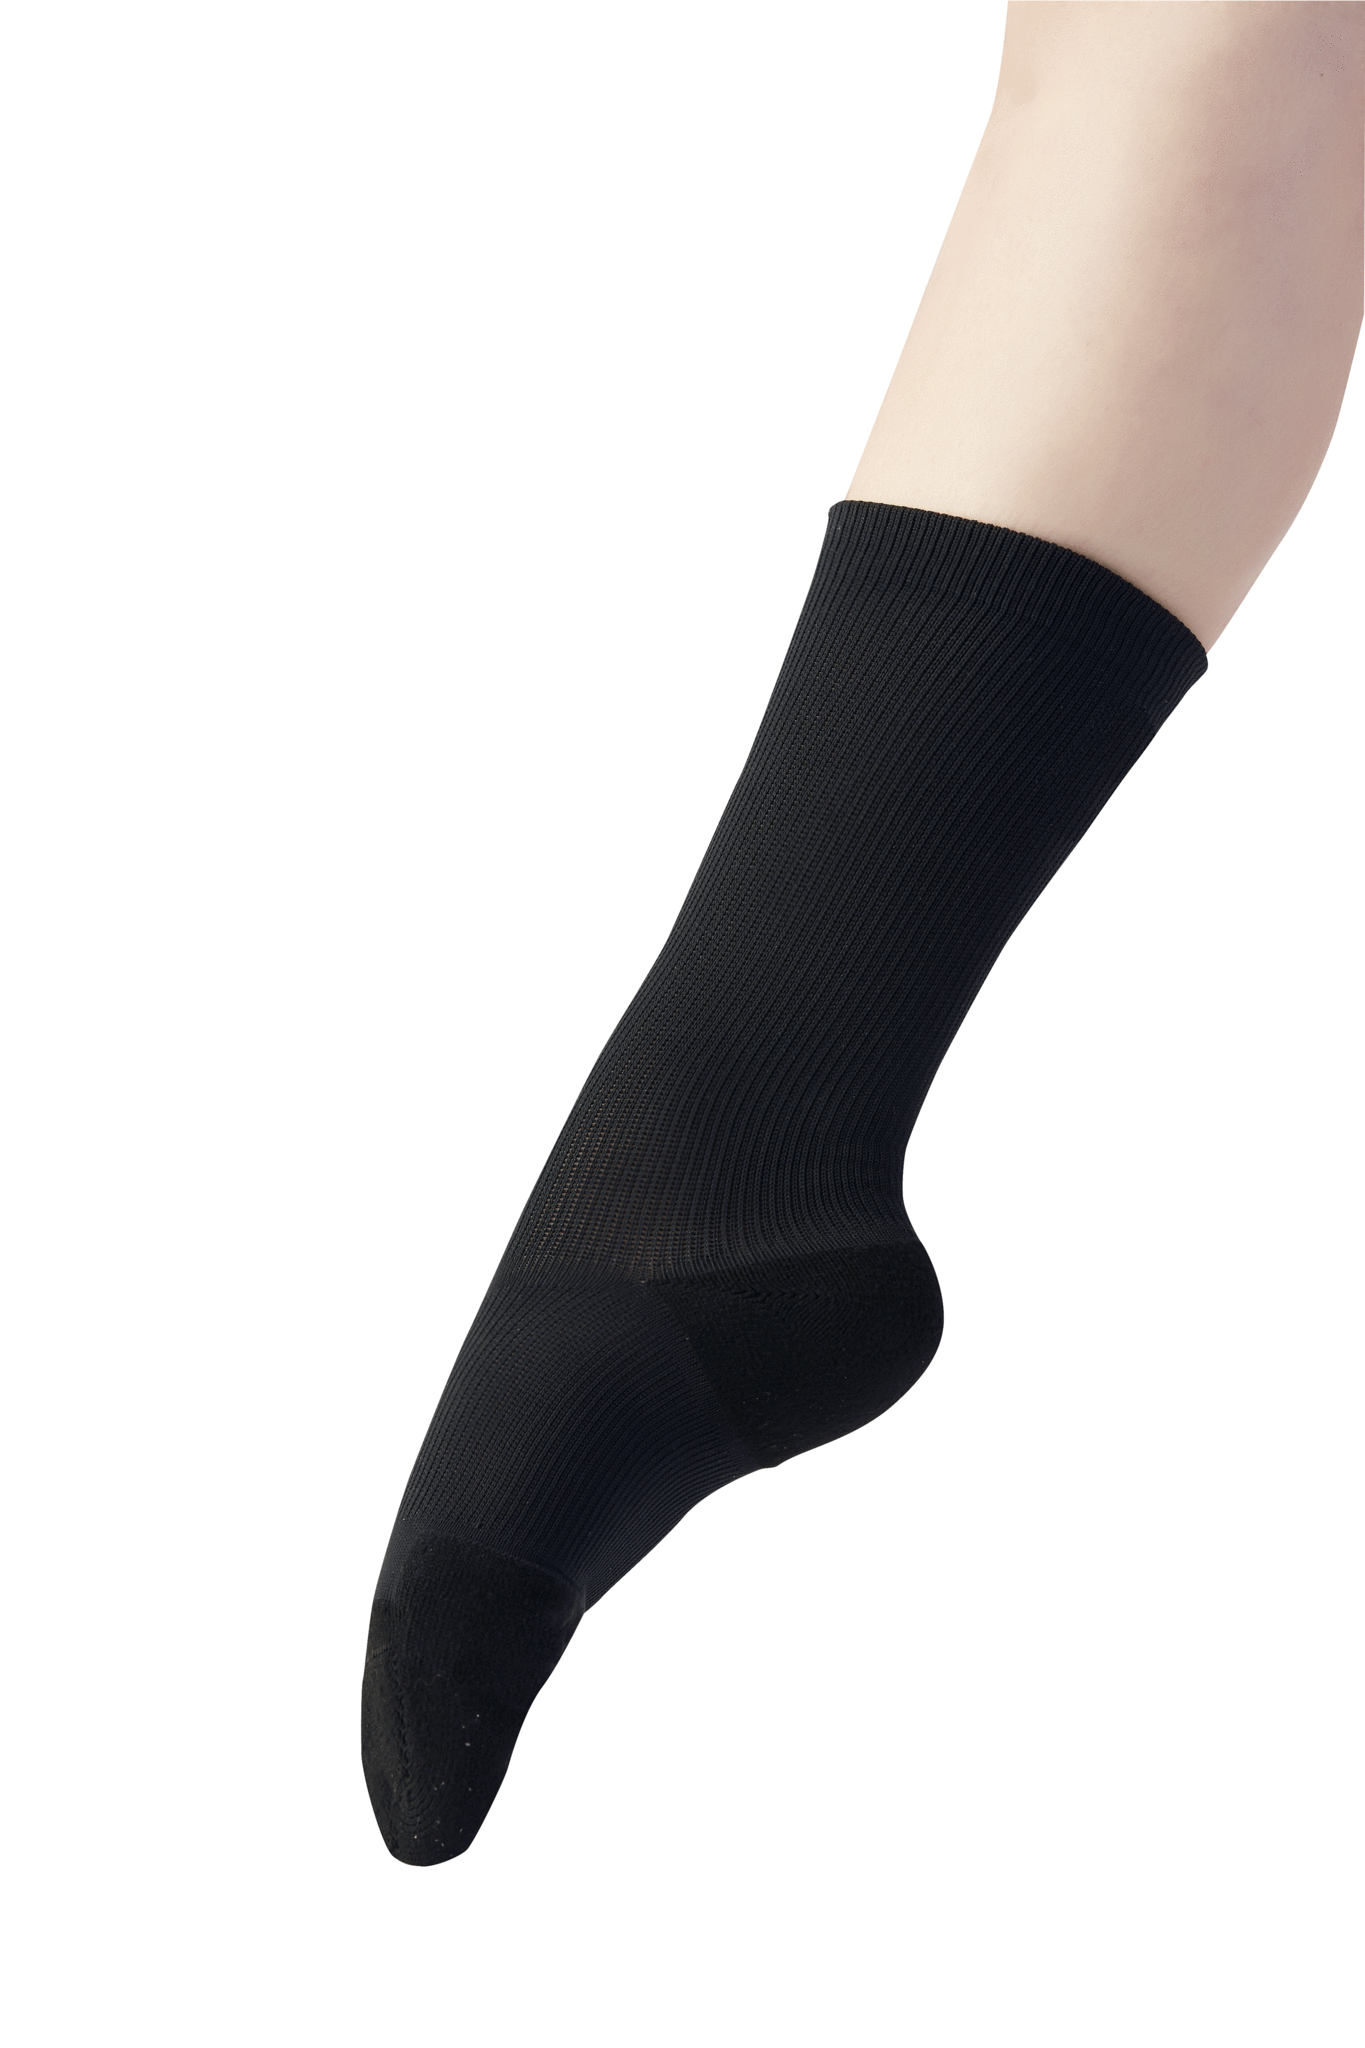 Apolla - Socks - Mid Calf Recovery  - THE INIFINITE SHOCK with traction